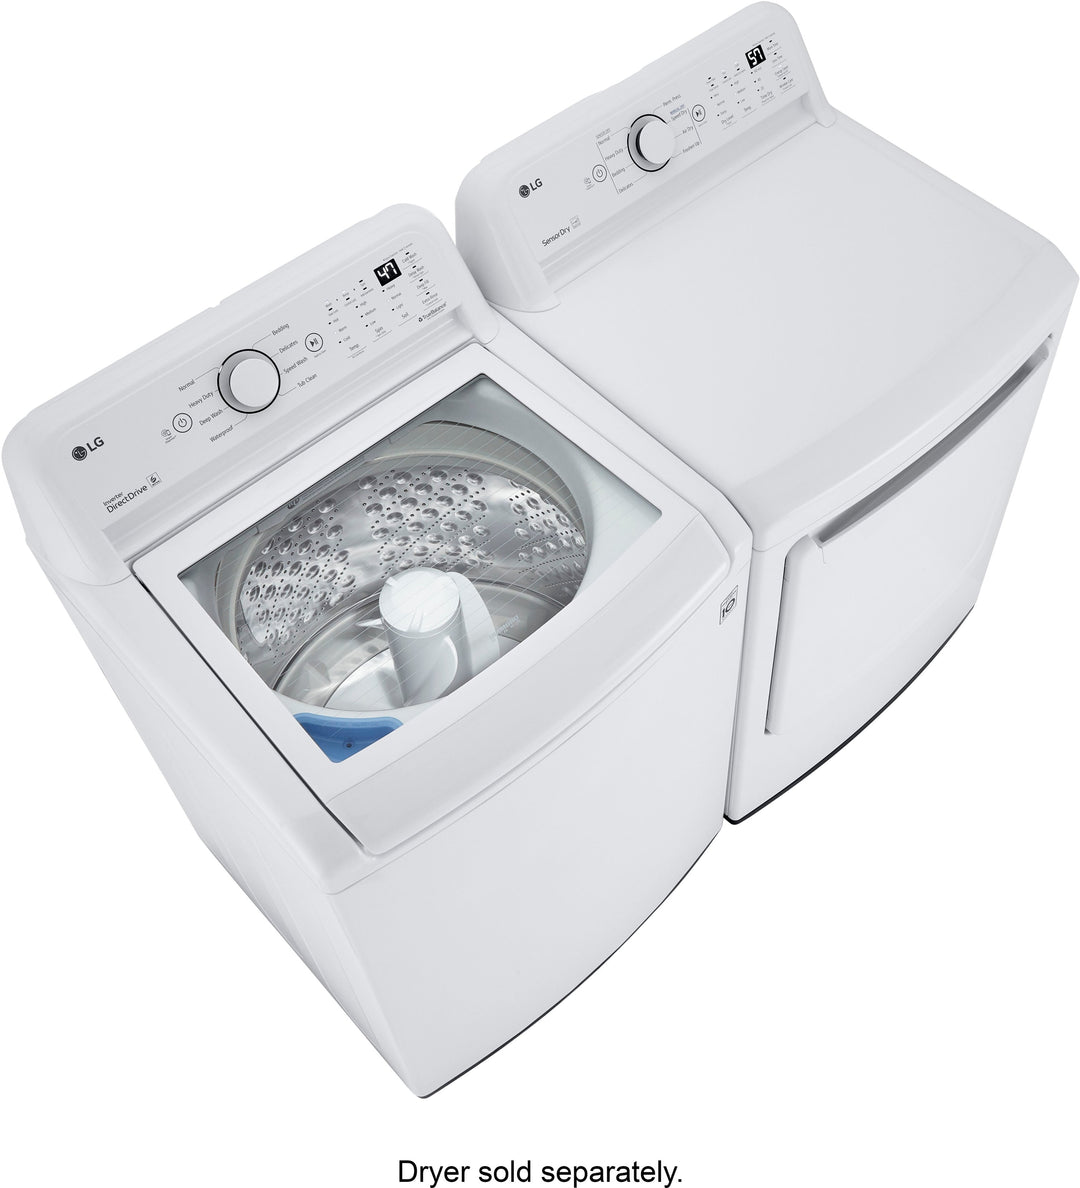 LG - 4.3 Cu. Ft. High-Efficiency Smart Top Load Washer with TurboDrum Technology - White_10